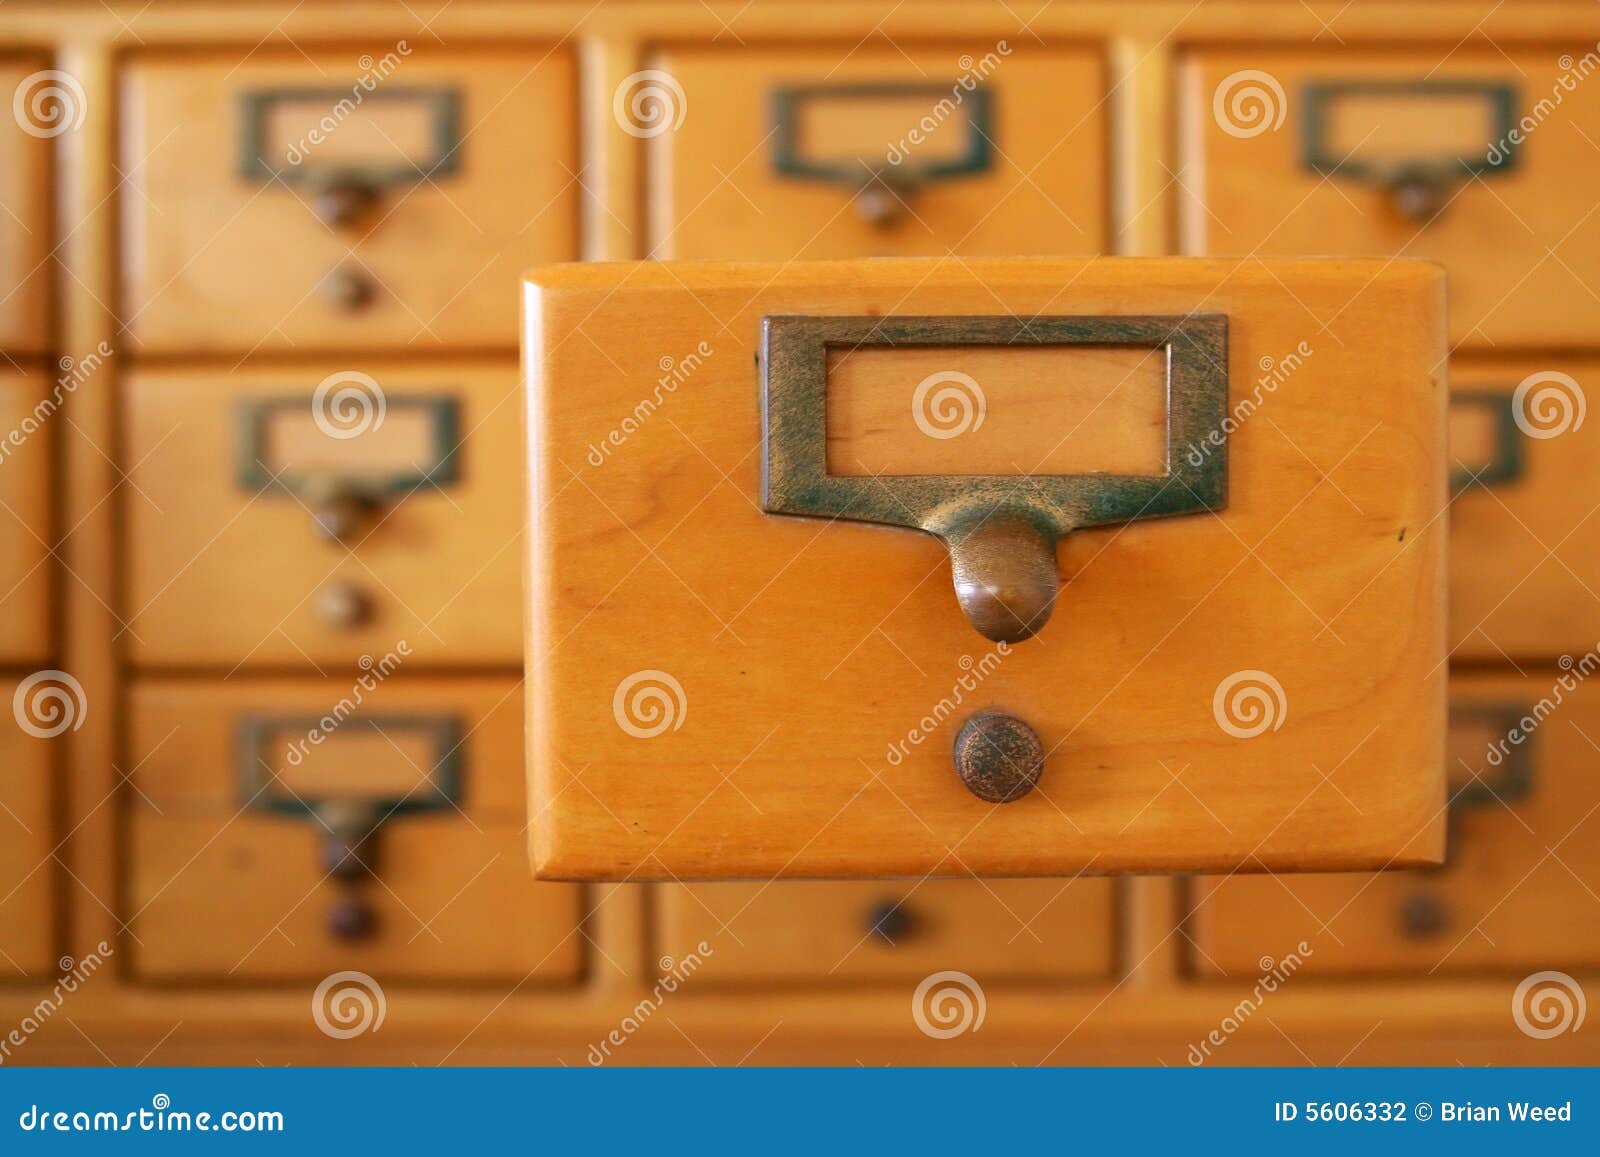 Library Card Drawer Stock Photo Image Of Library System 5606332